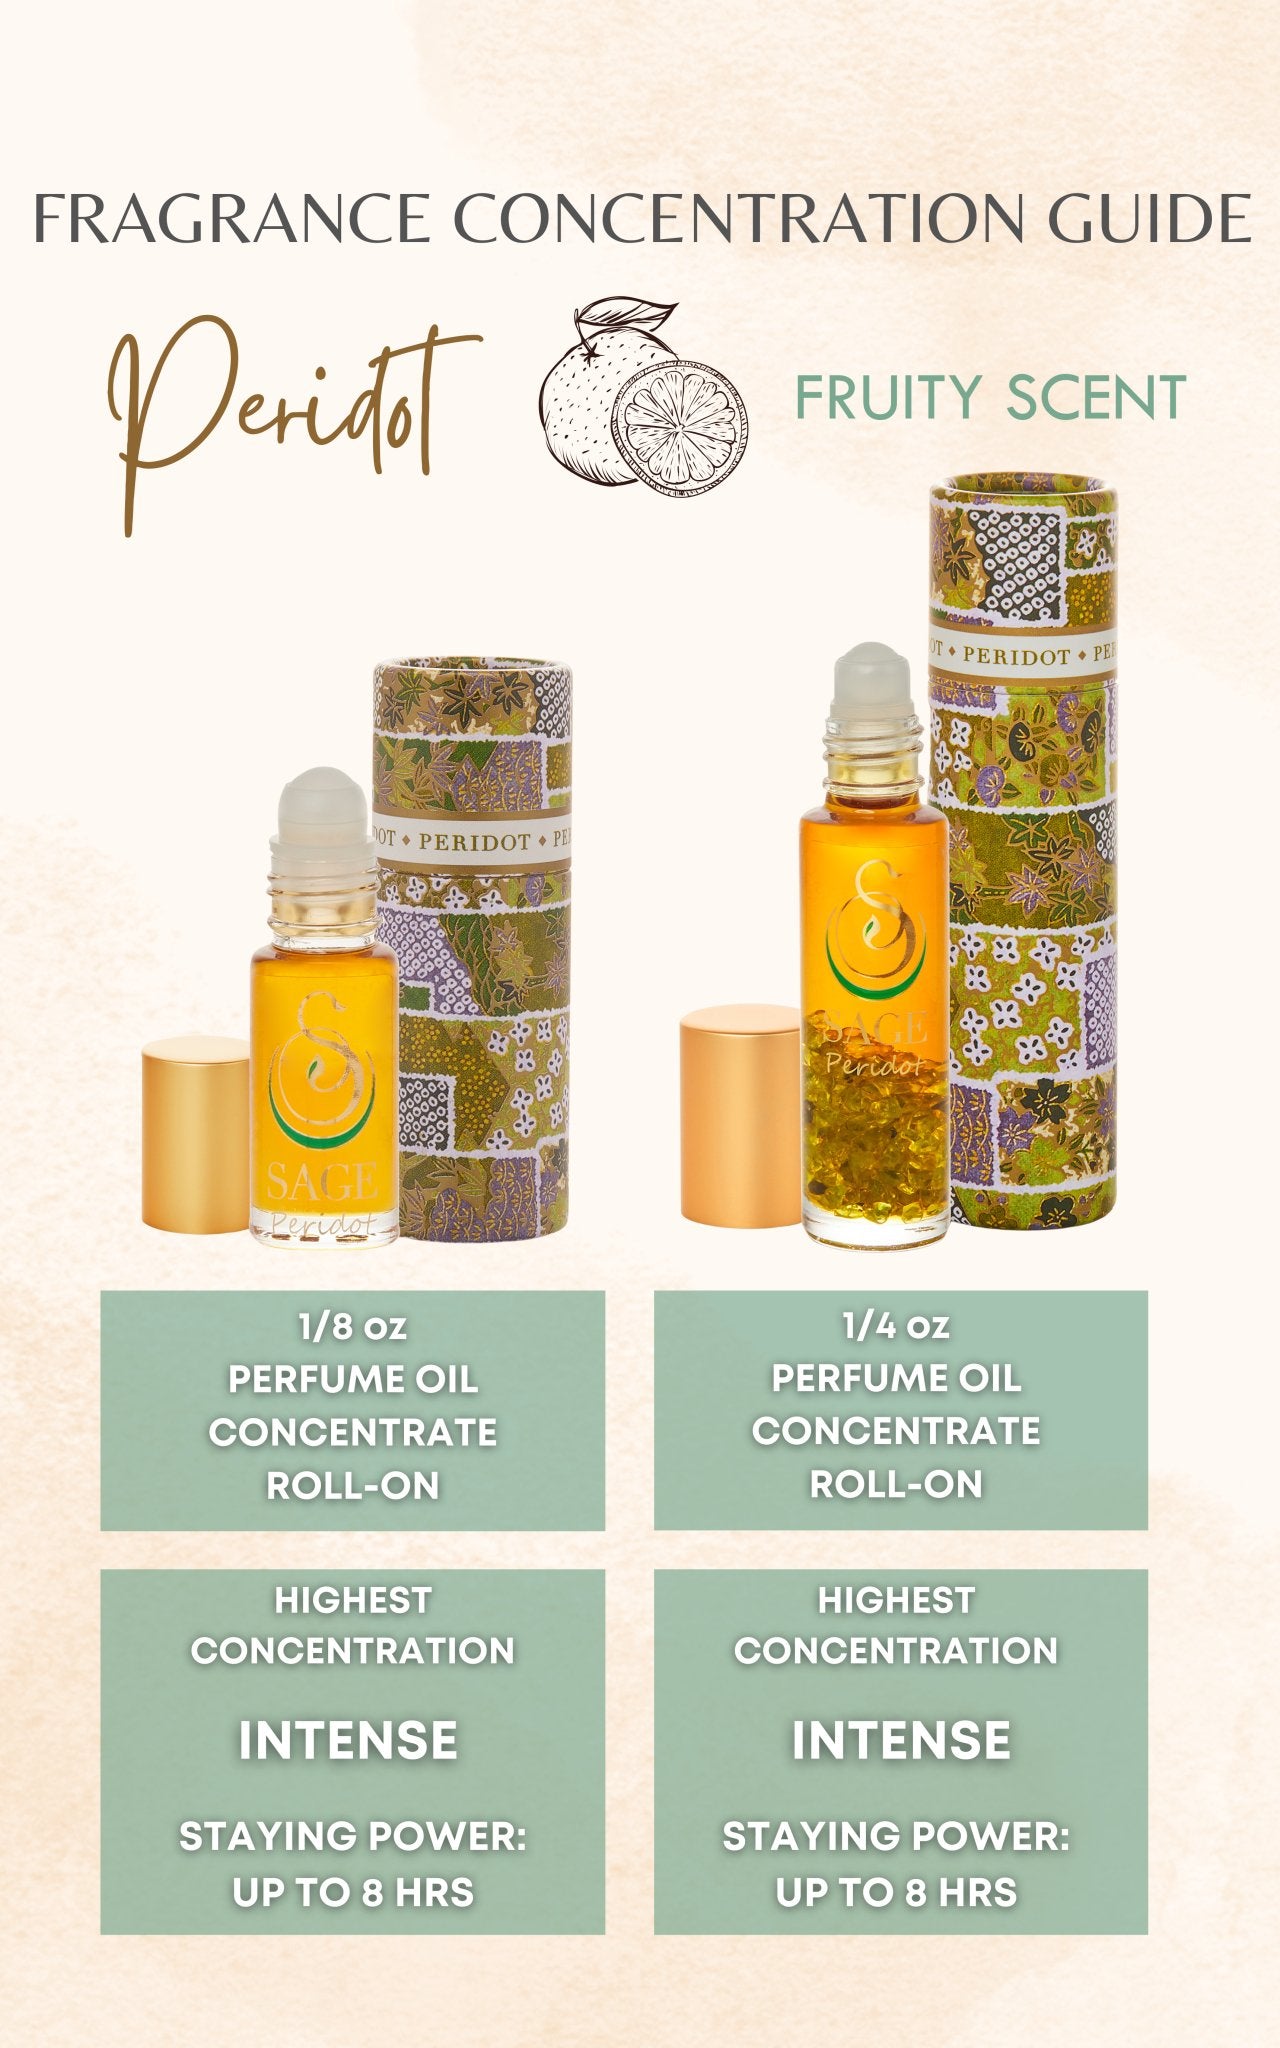 Peridot 1/4 oz Gemstone Perfume Oil Concentrate Roll-On by Sage - The Sage Lifestyle